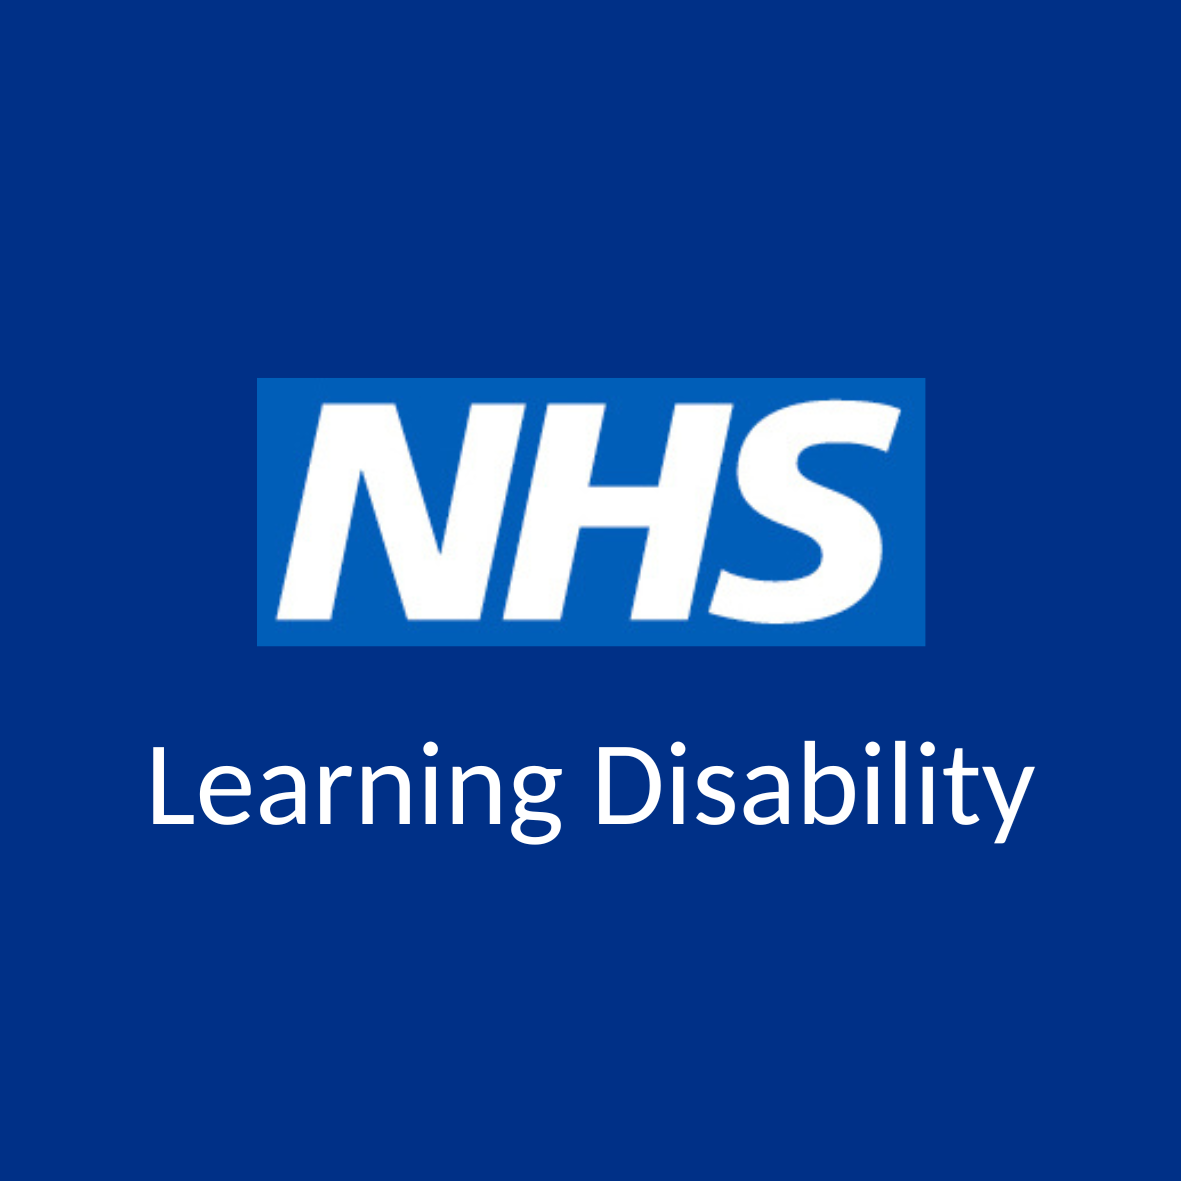 NHS Logo and Words Learning Disability